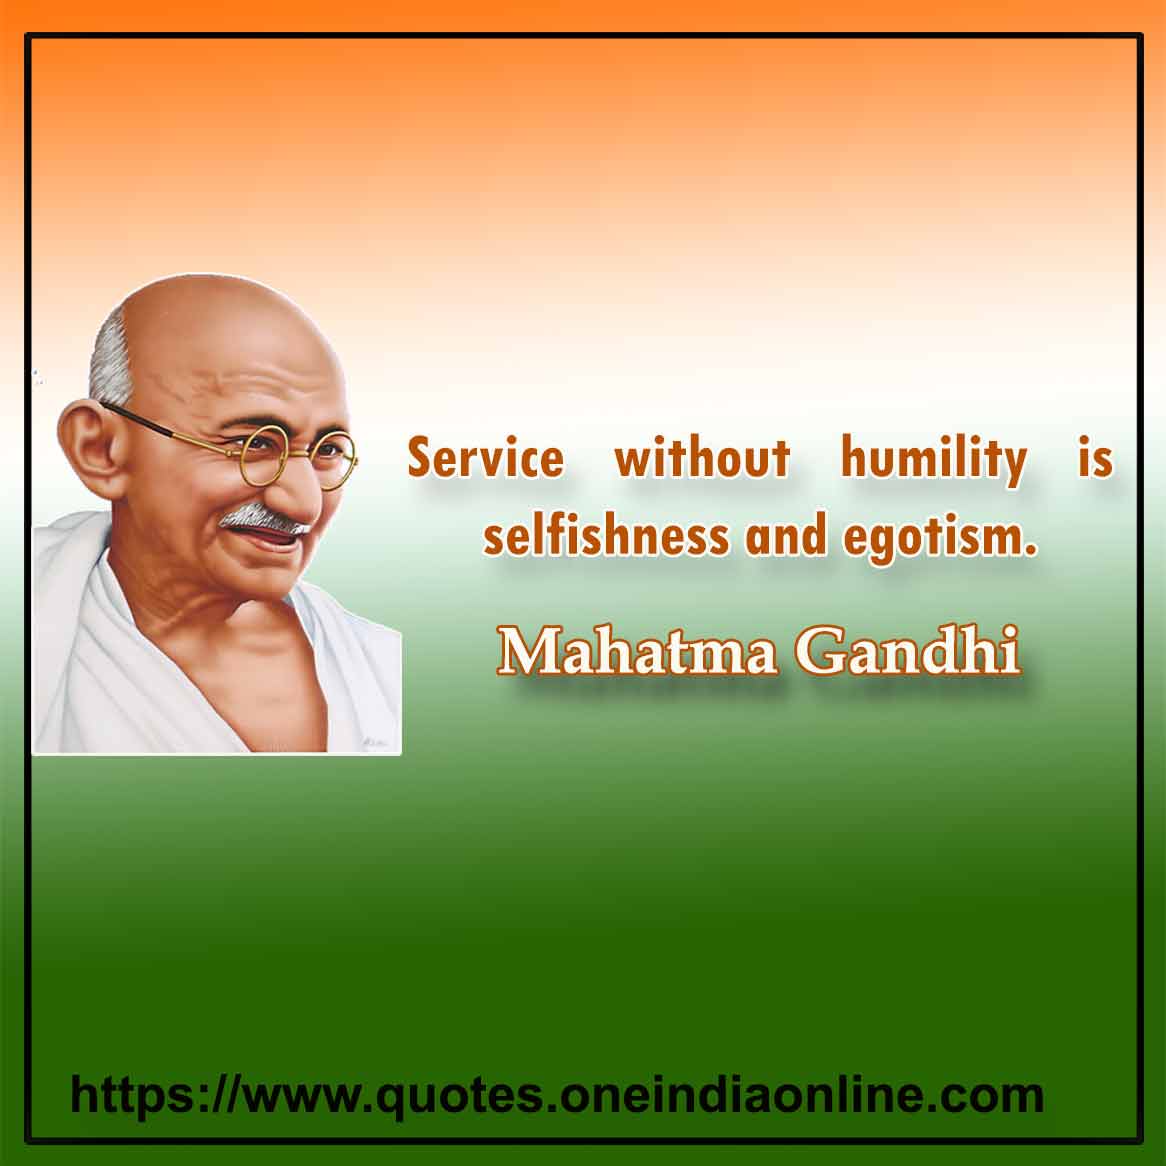 Service without humility is selfishness and egotism.

Mahatma Gandhi Thoughts in English